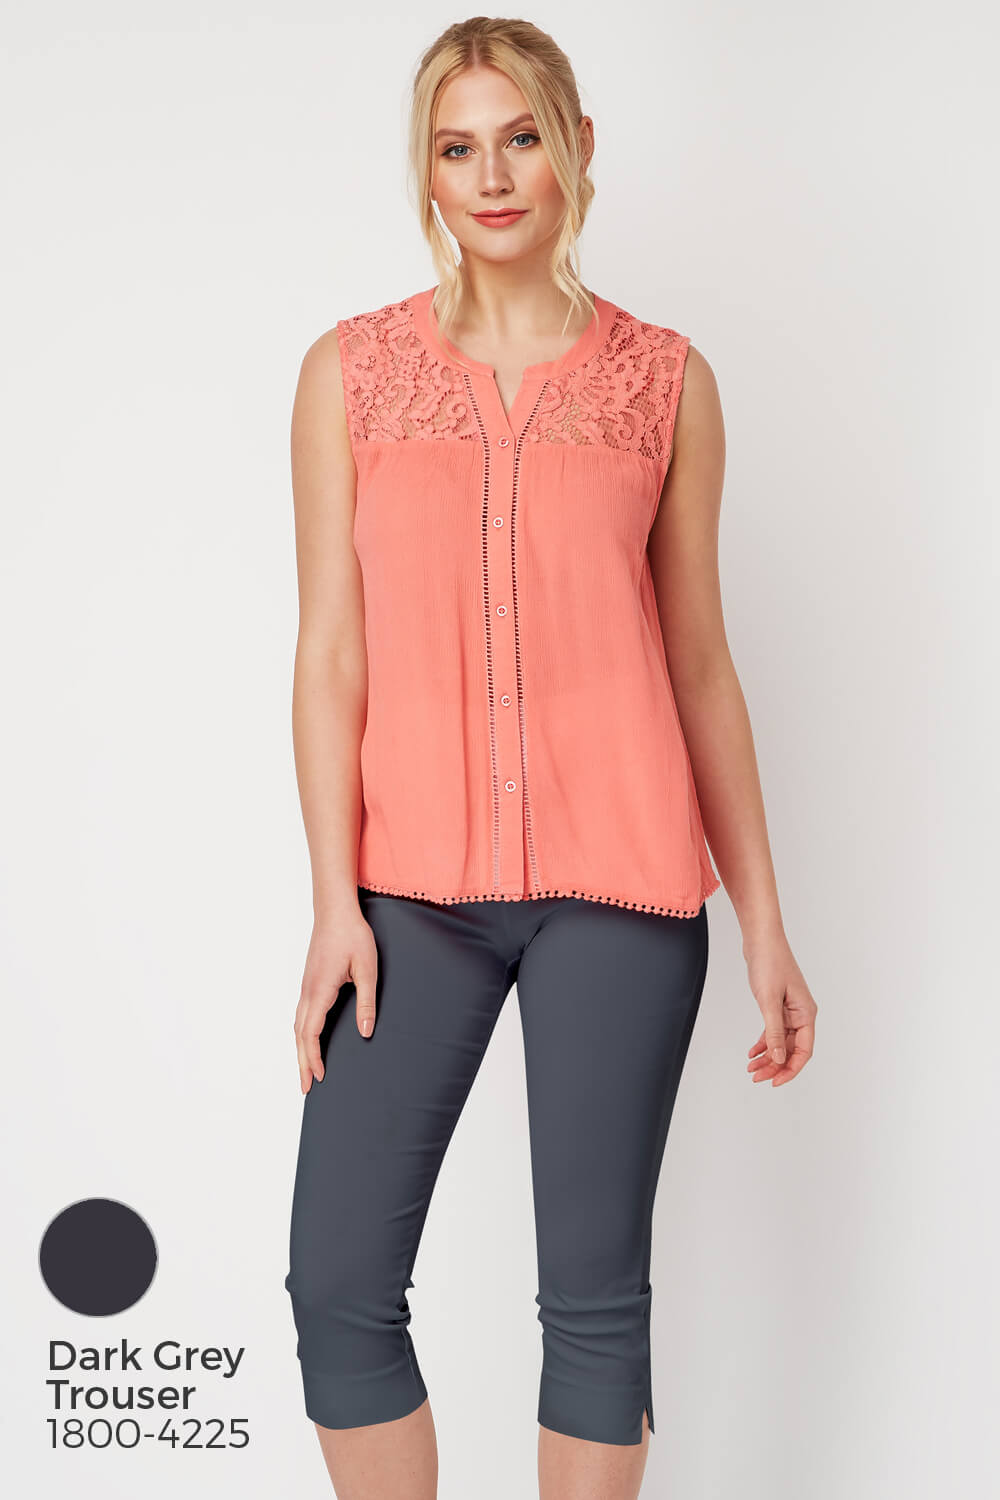 CORAL Lace Insert Button Up Blouse, Image 7 of 8